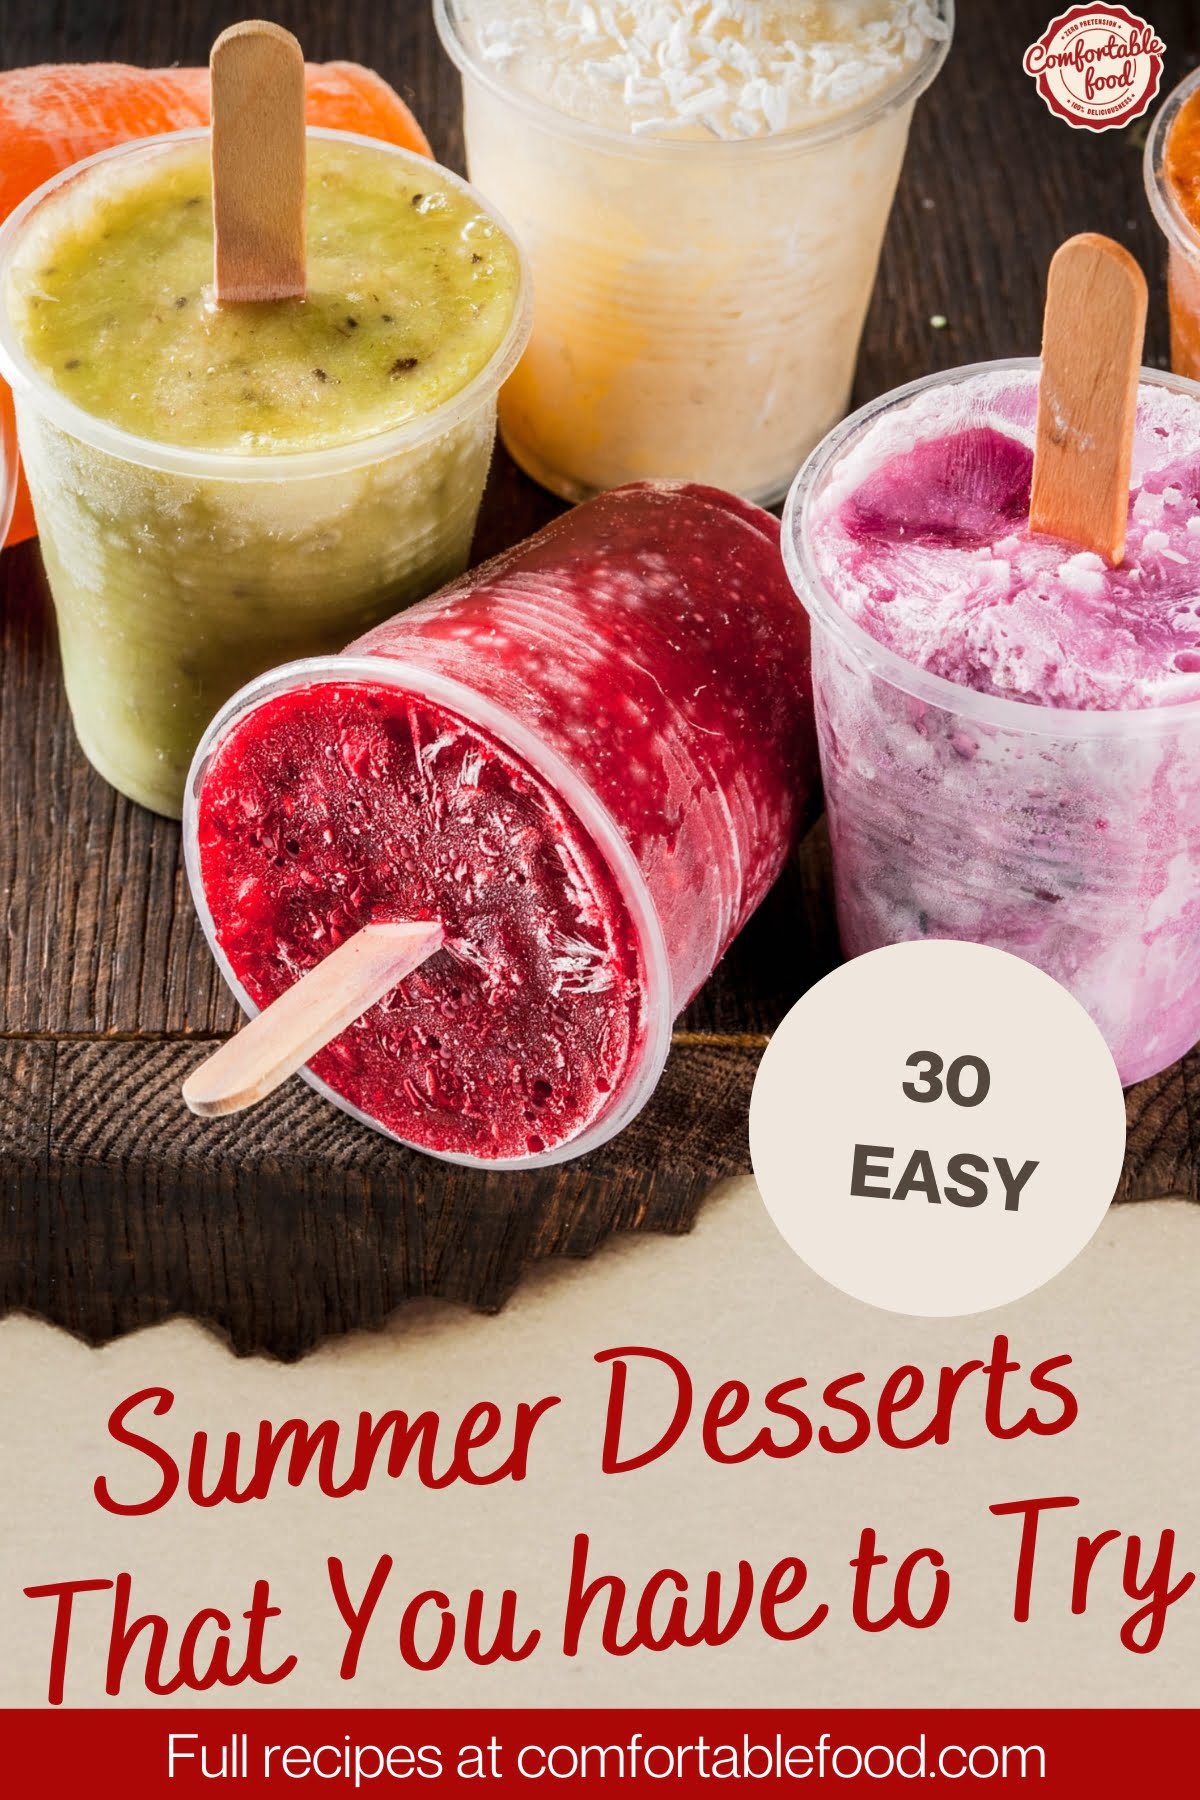 Easy summer desserts that you hae to try - socials